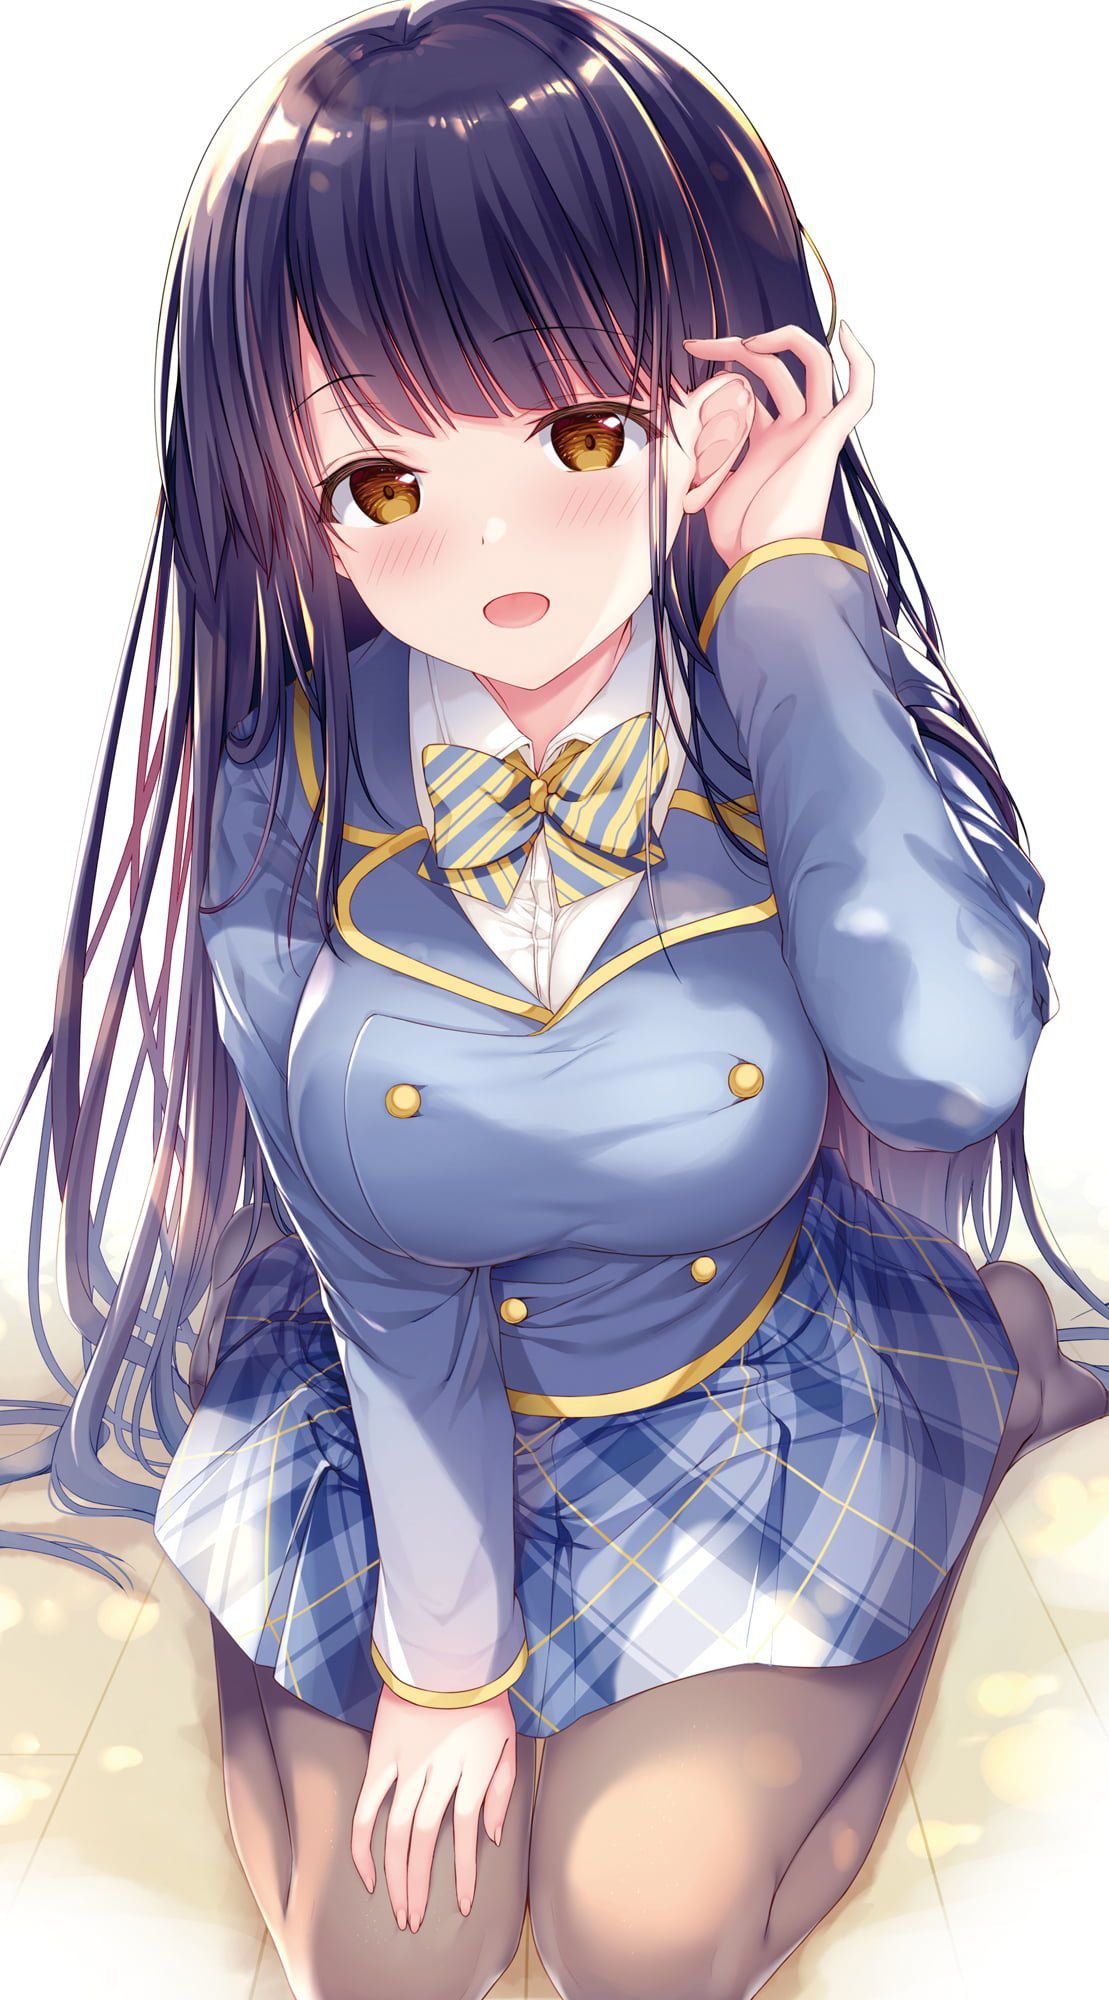 In the real world, you will be reported just by looking at it, so let's looking at a beautiful girl in a two-dimensional uniform! 39